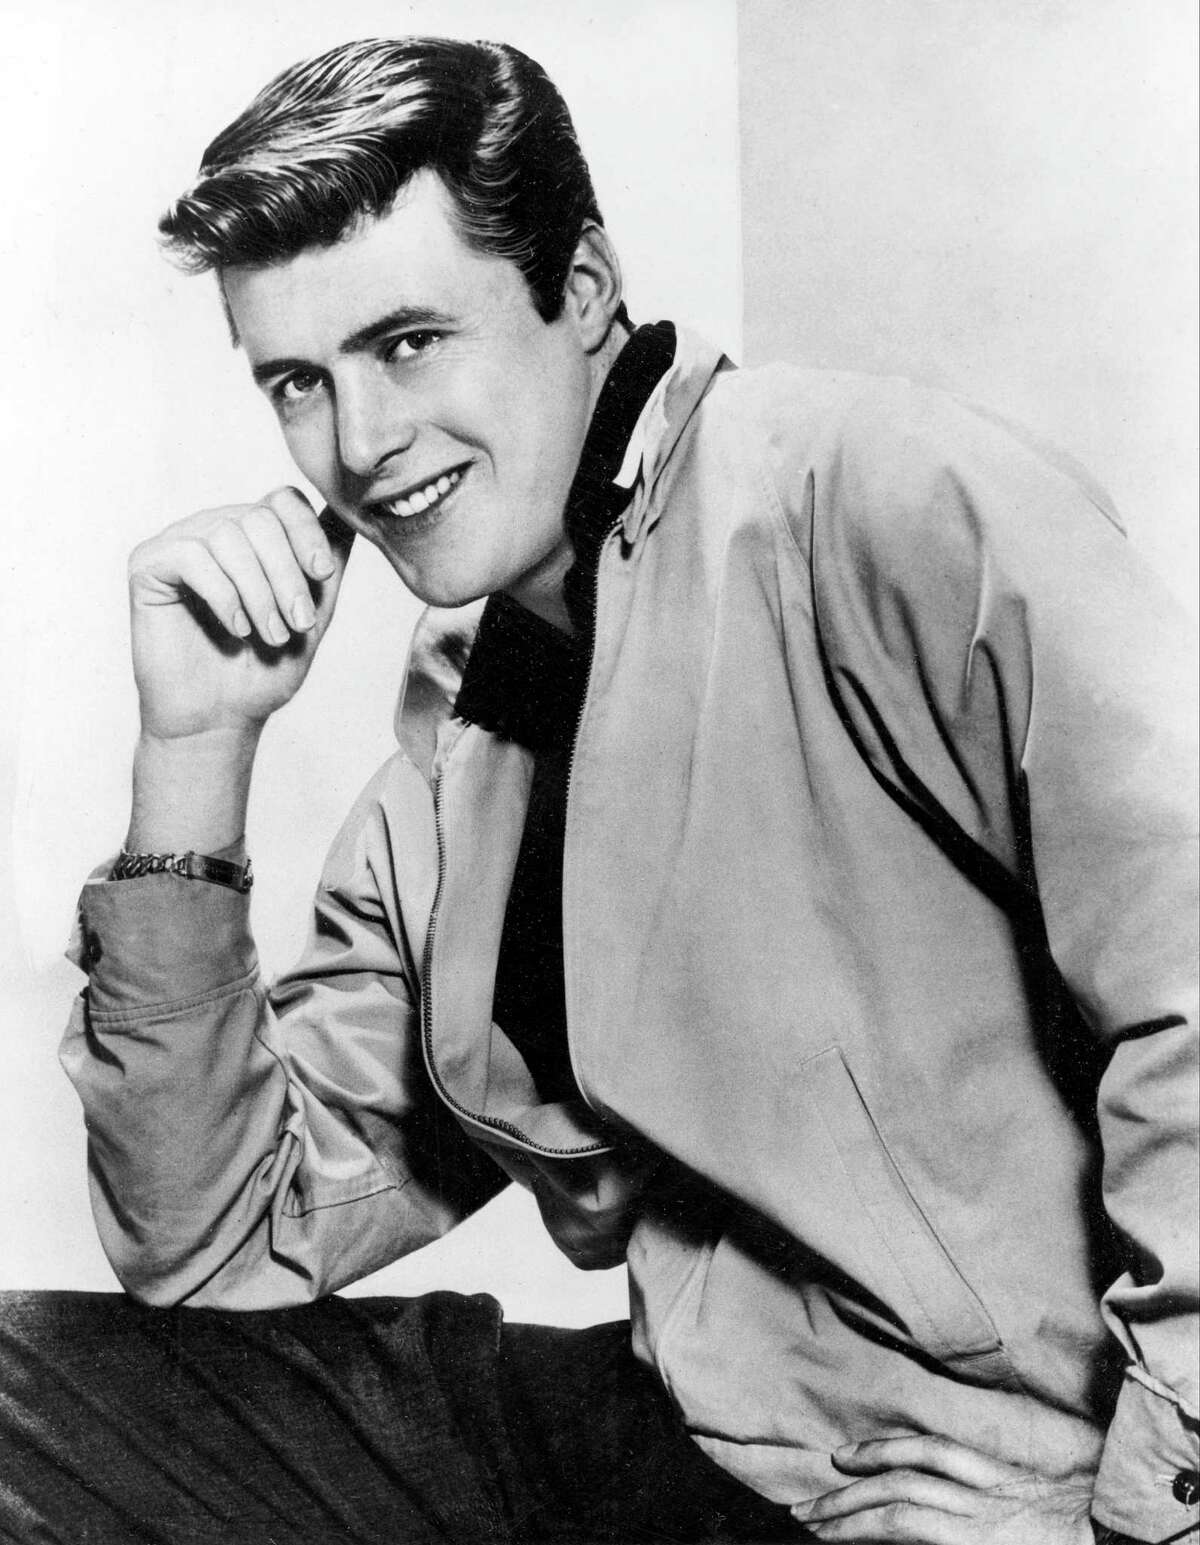 Edd Byrnes, Jan. 8, 2020 Played cool-kid Kookie on the hit TV show “77 Sunset Strip,” scored a gold record with a song about his character’s hair-combing obsession and later appeared in the movie “Grease.” Byrnes died of natural causes at the age of 87.